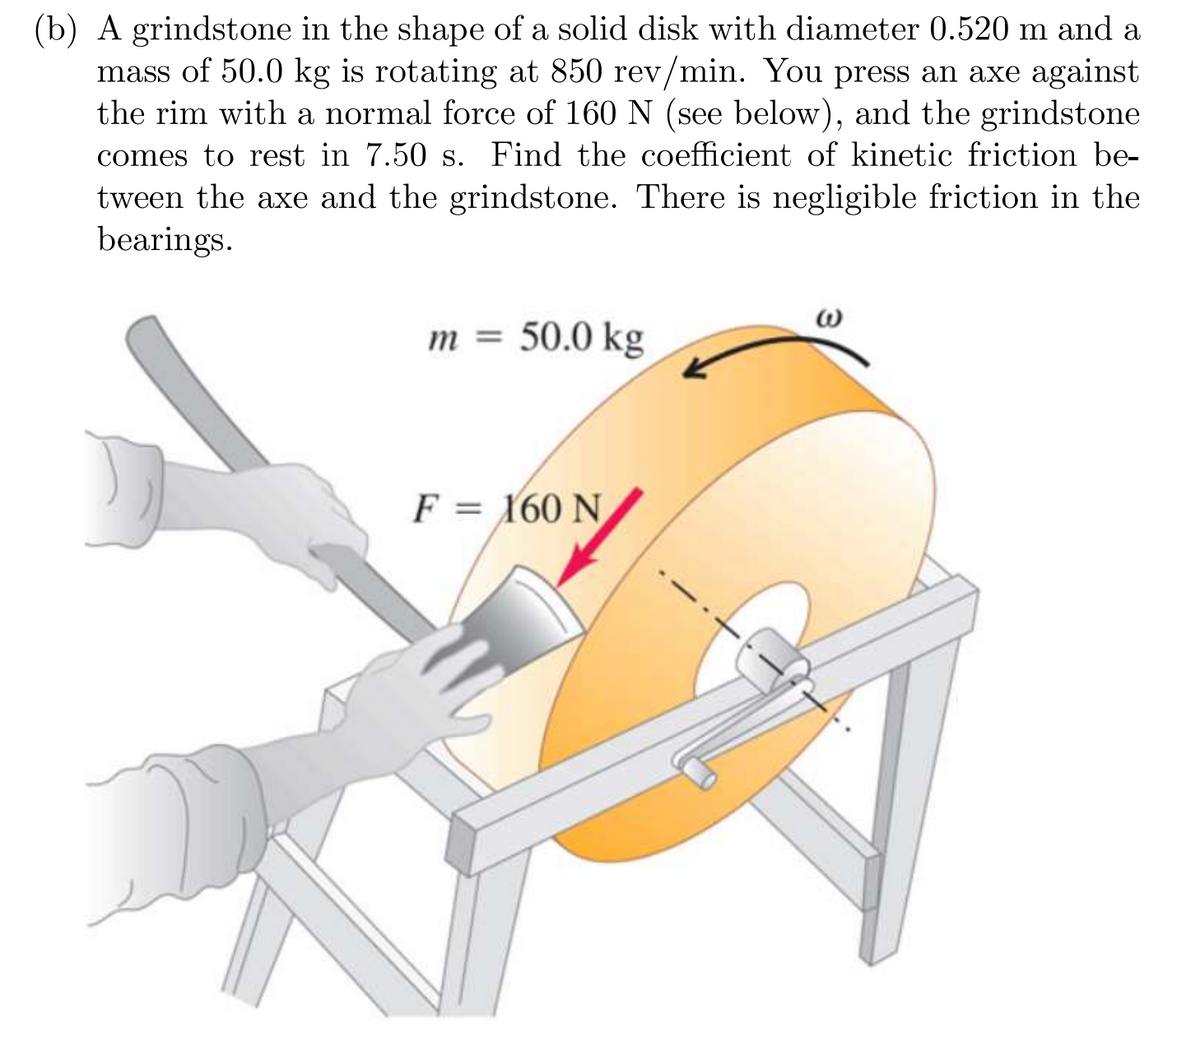 (b) A grindstone in the shape of a solid disk with diameter 0.520 m and a
mass of 50.0 kg is rotating at 850 rev/min. You press an axe against
the rim with a normal force of 160 N (see below), and the grindstone
comes to rest in 7.50 s. Find the coefficient of kinetic friction be-
tween the axe and the grindstone. There is negligible friction in the
bearings.
m = 50.0 kg
F = 160 N